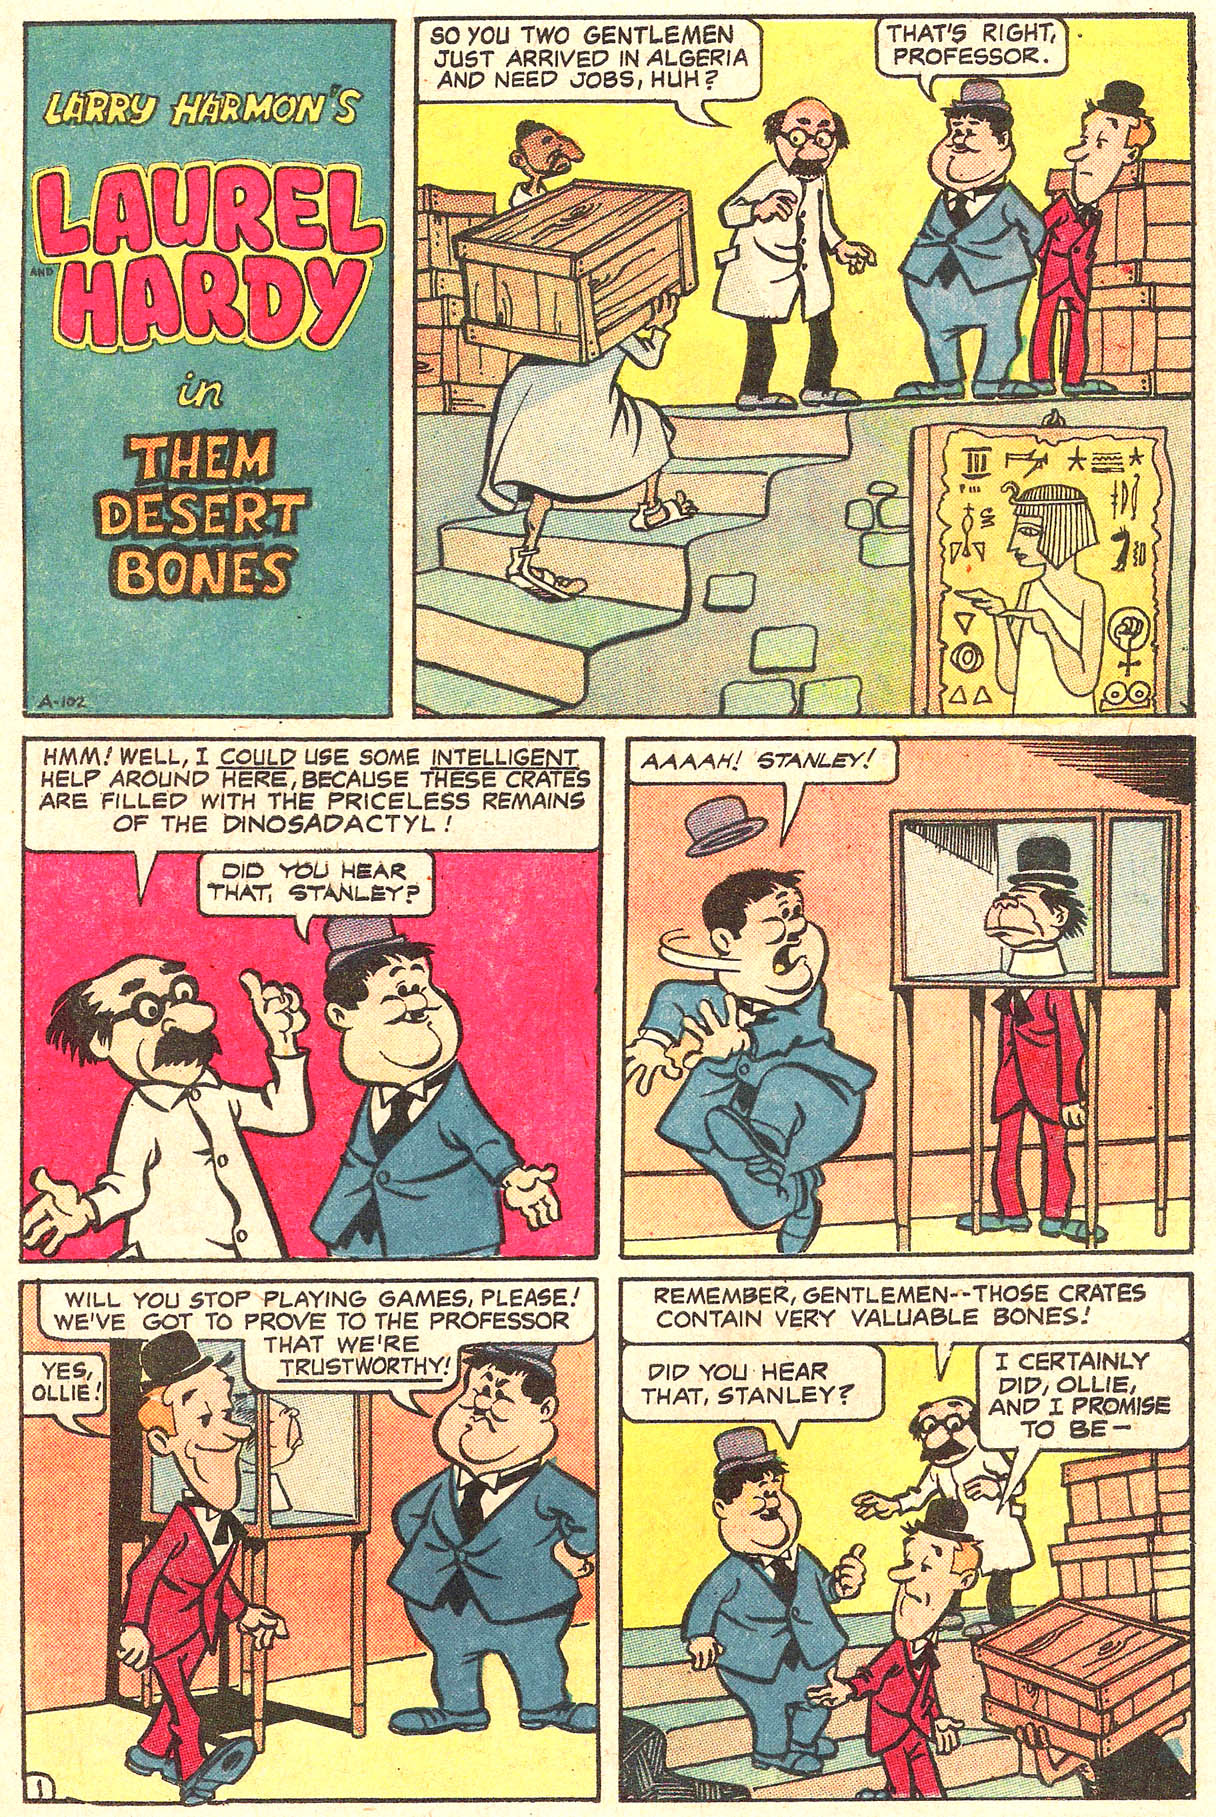 Read online Larry Harmon's Laurel and Hardy comic -  Issue # Full - 19